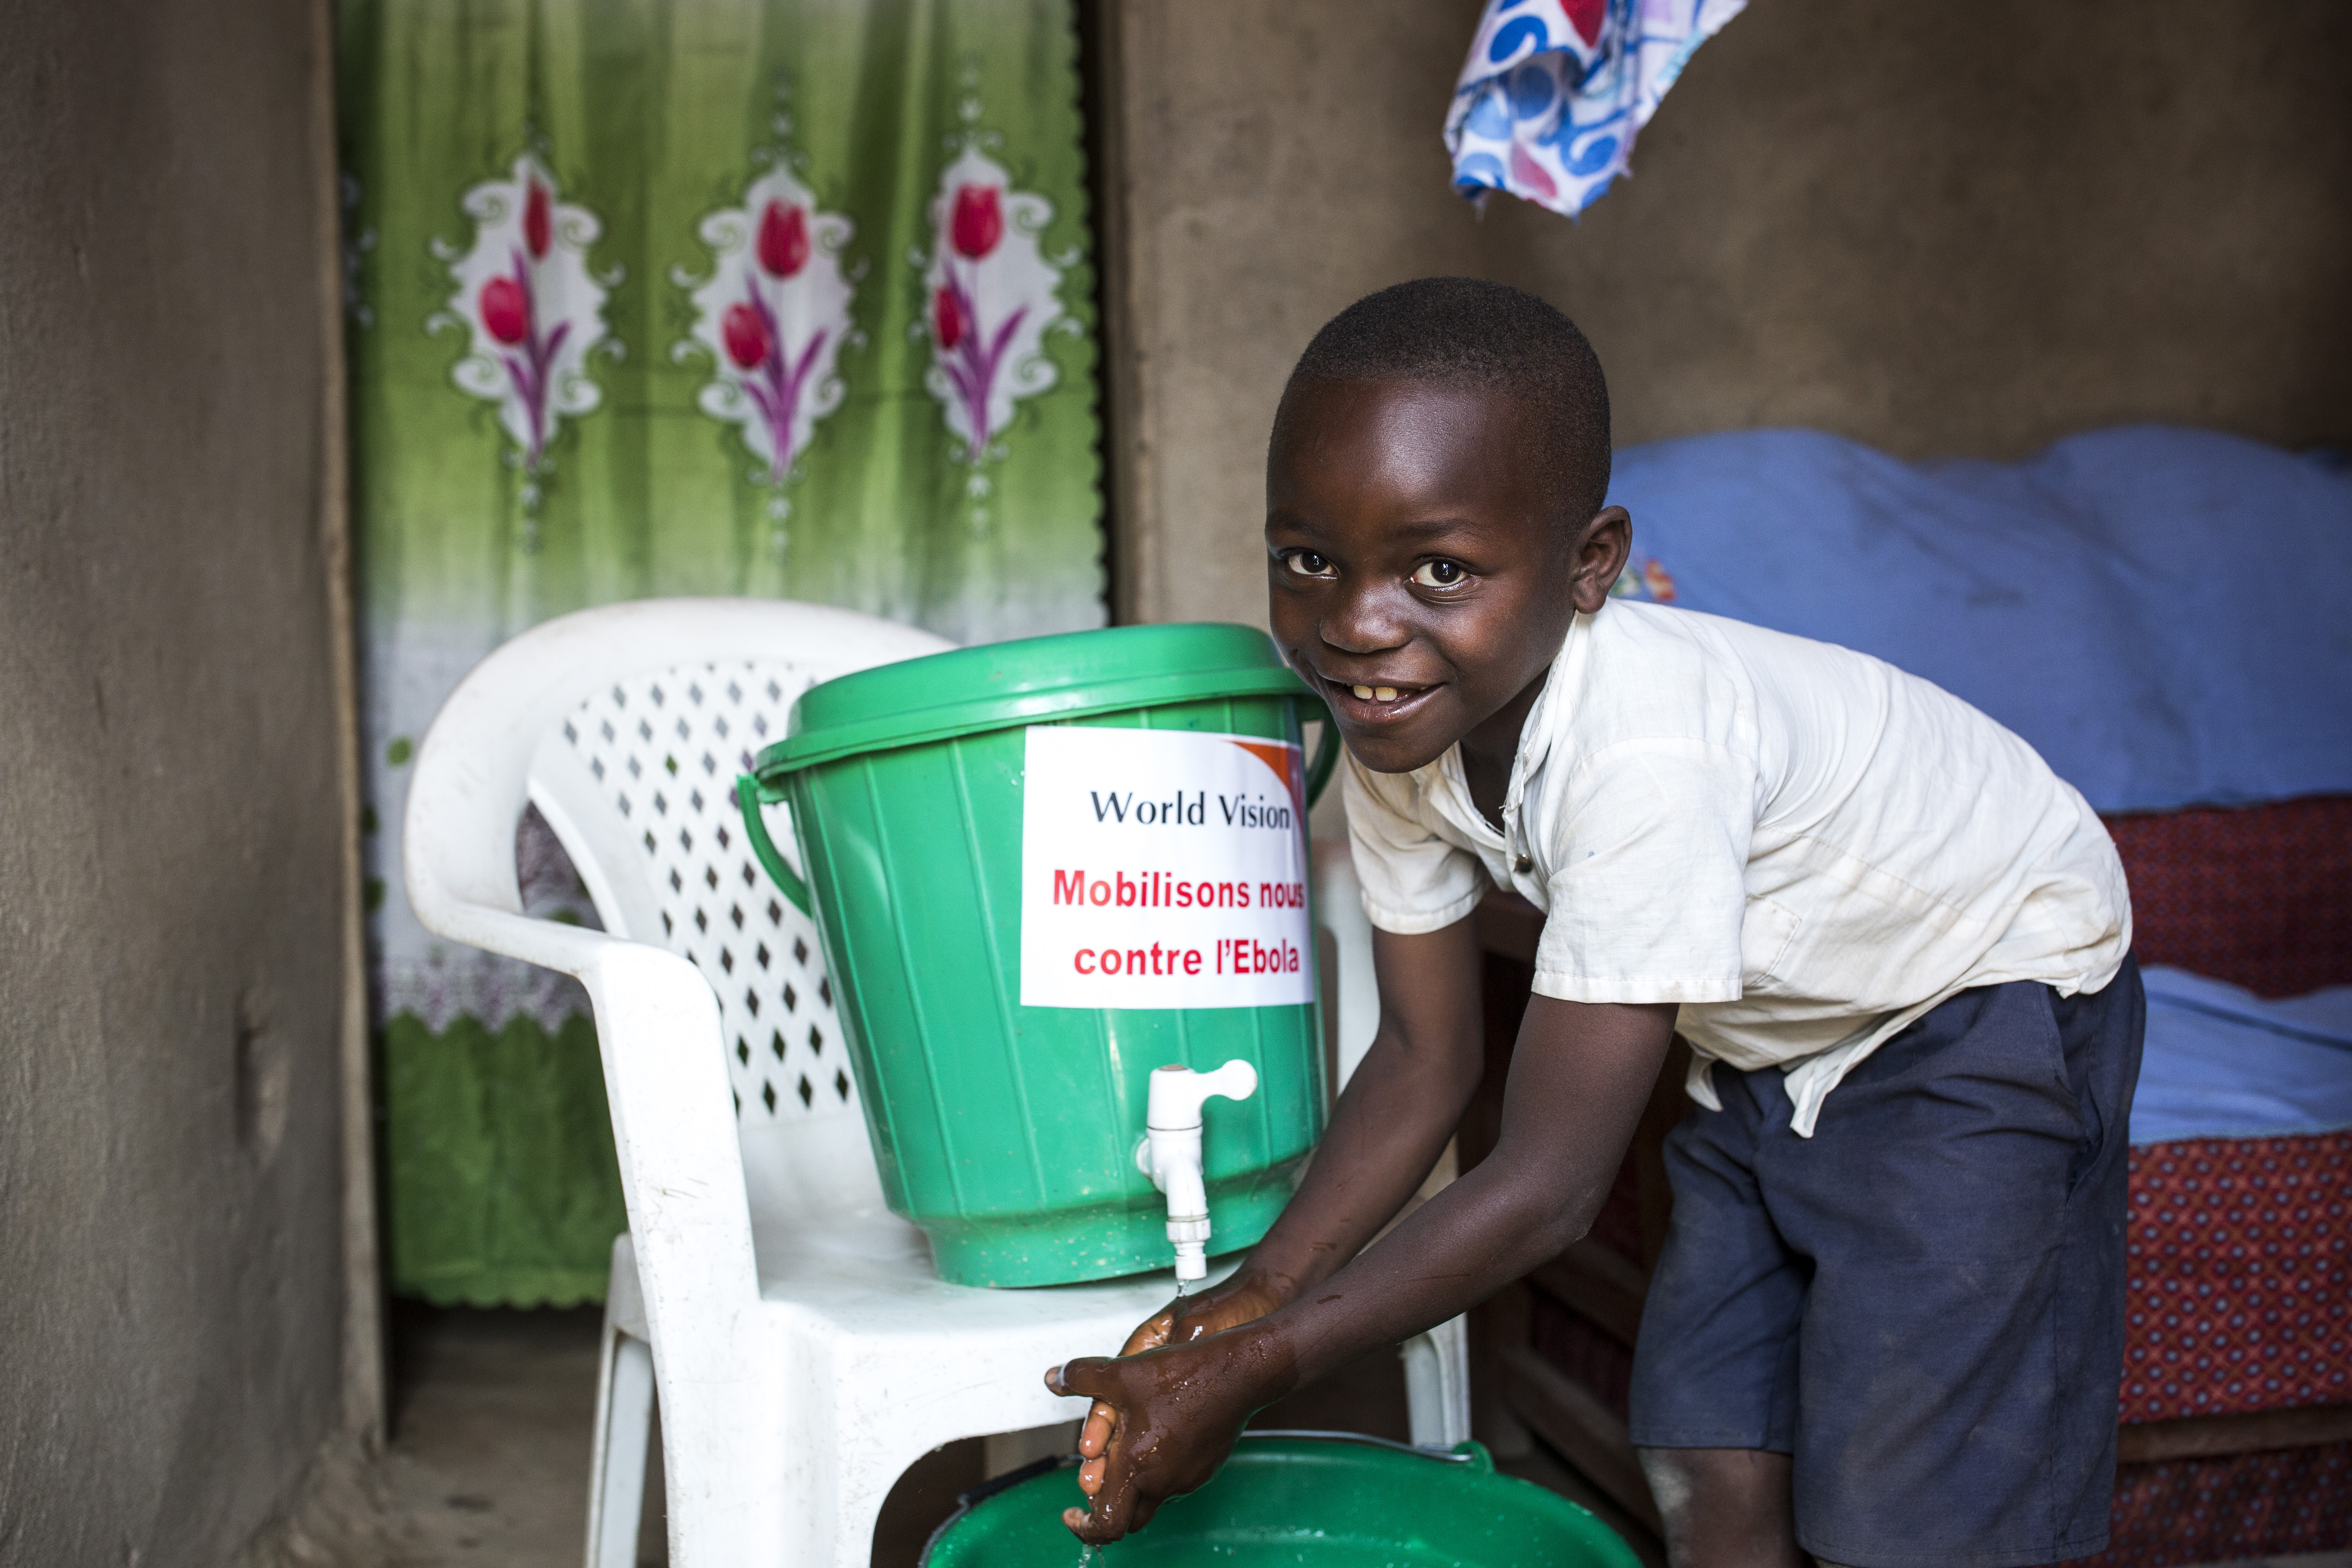 A young boy smiles while washing his hands at a World Vision water point